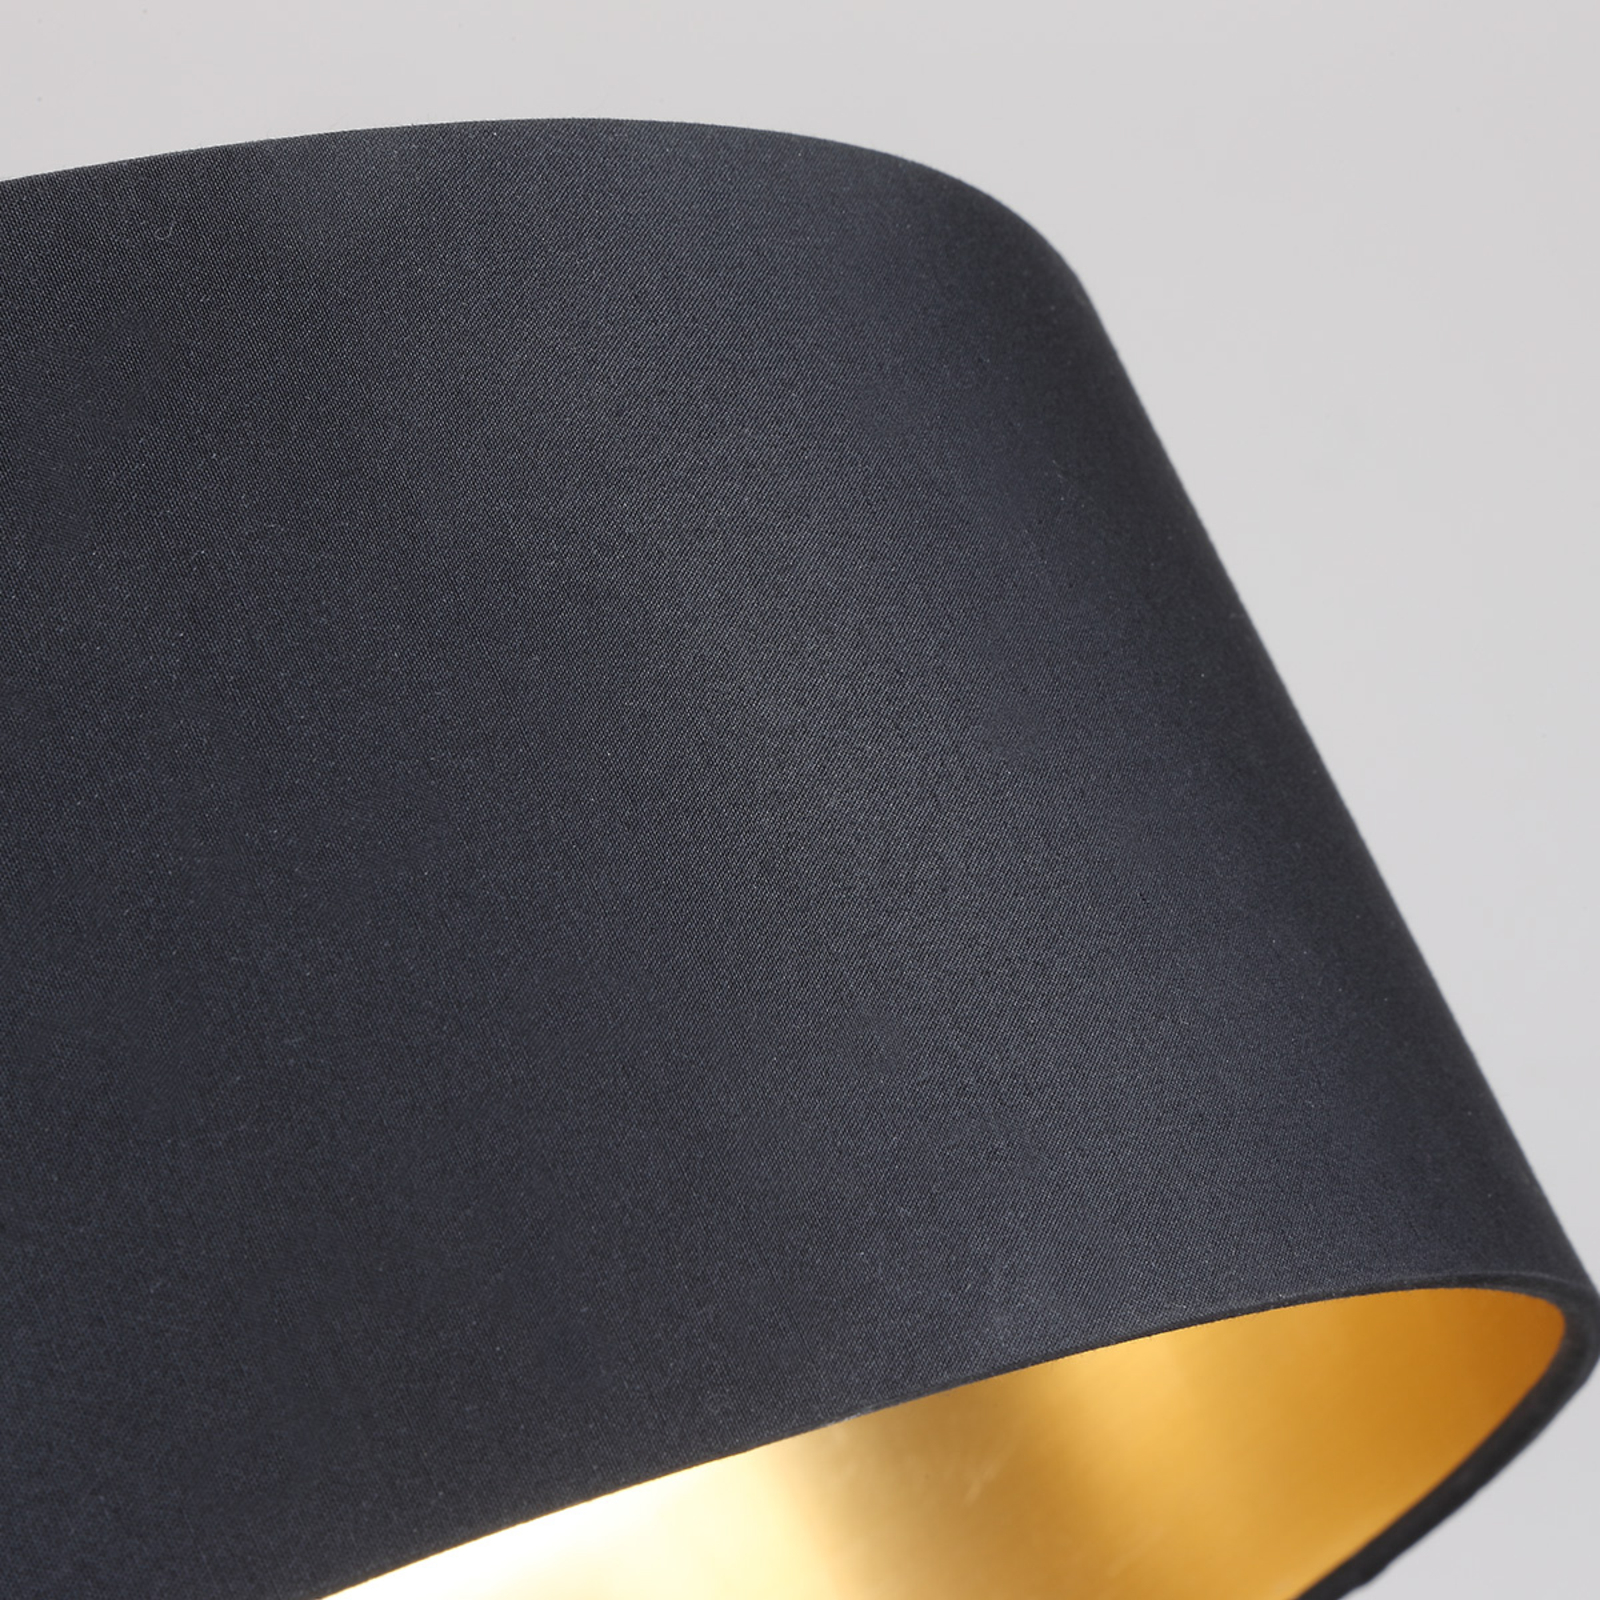 Fabric ceiling lamp Coleen in black, gold inside